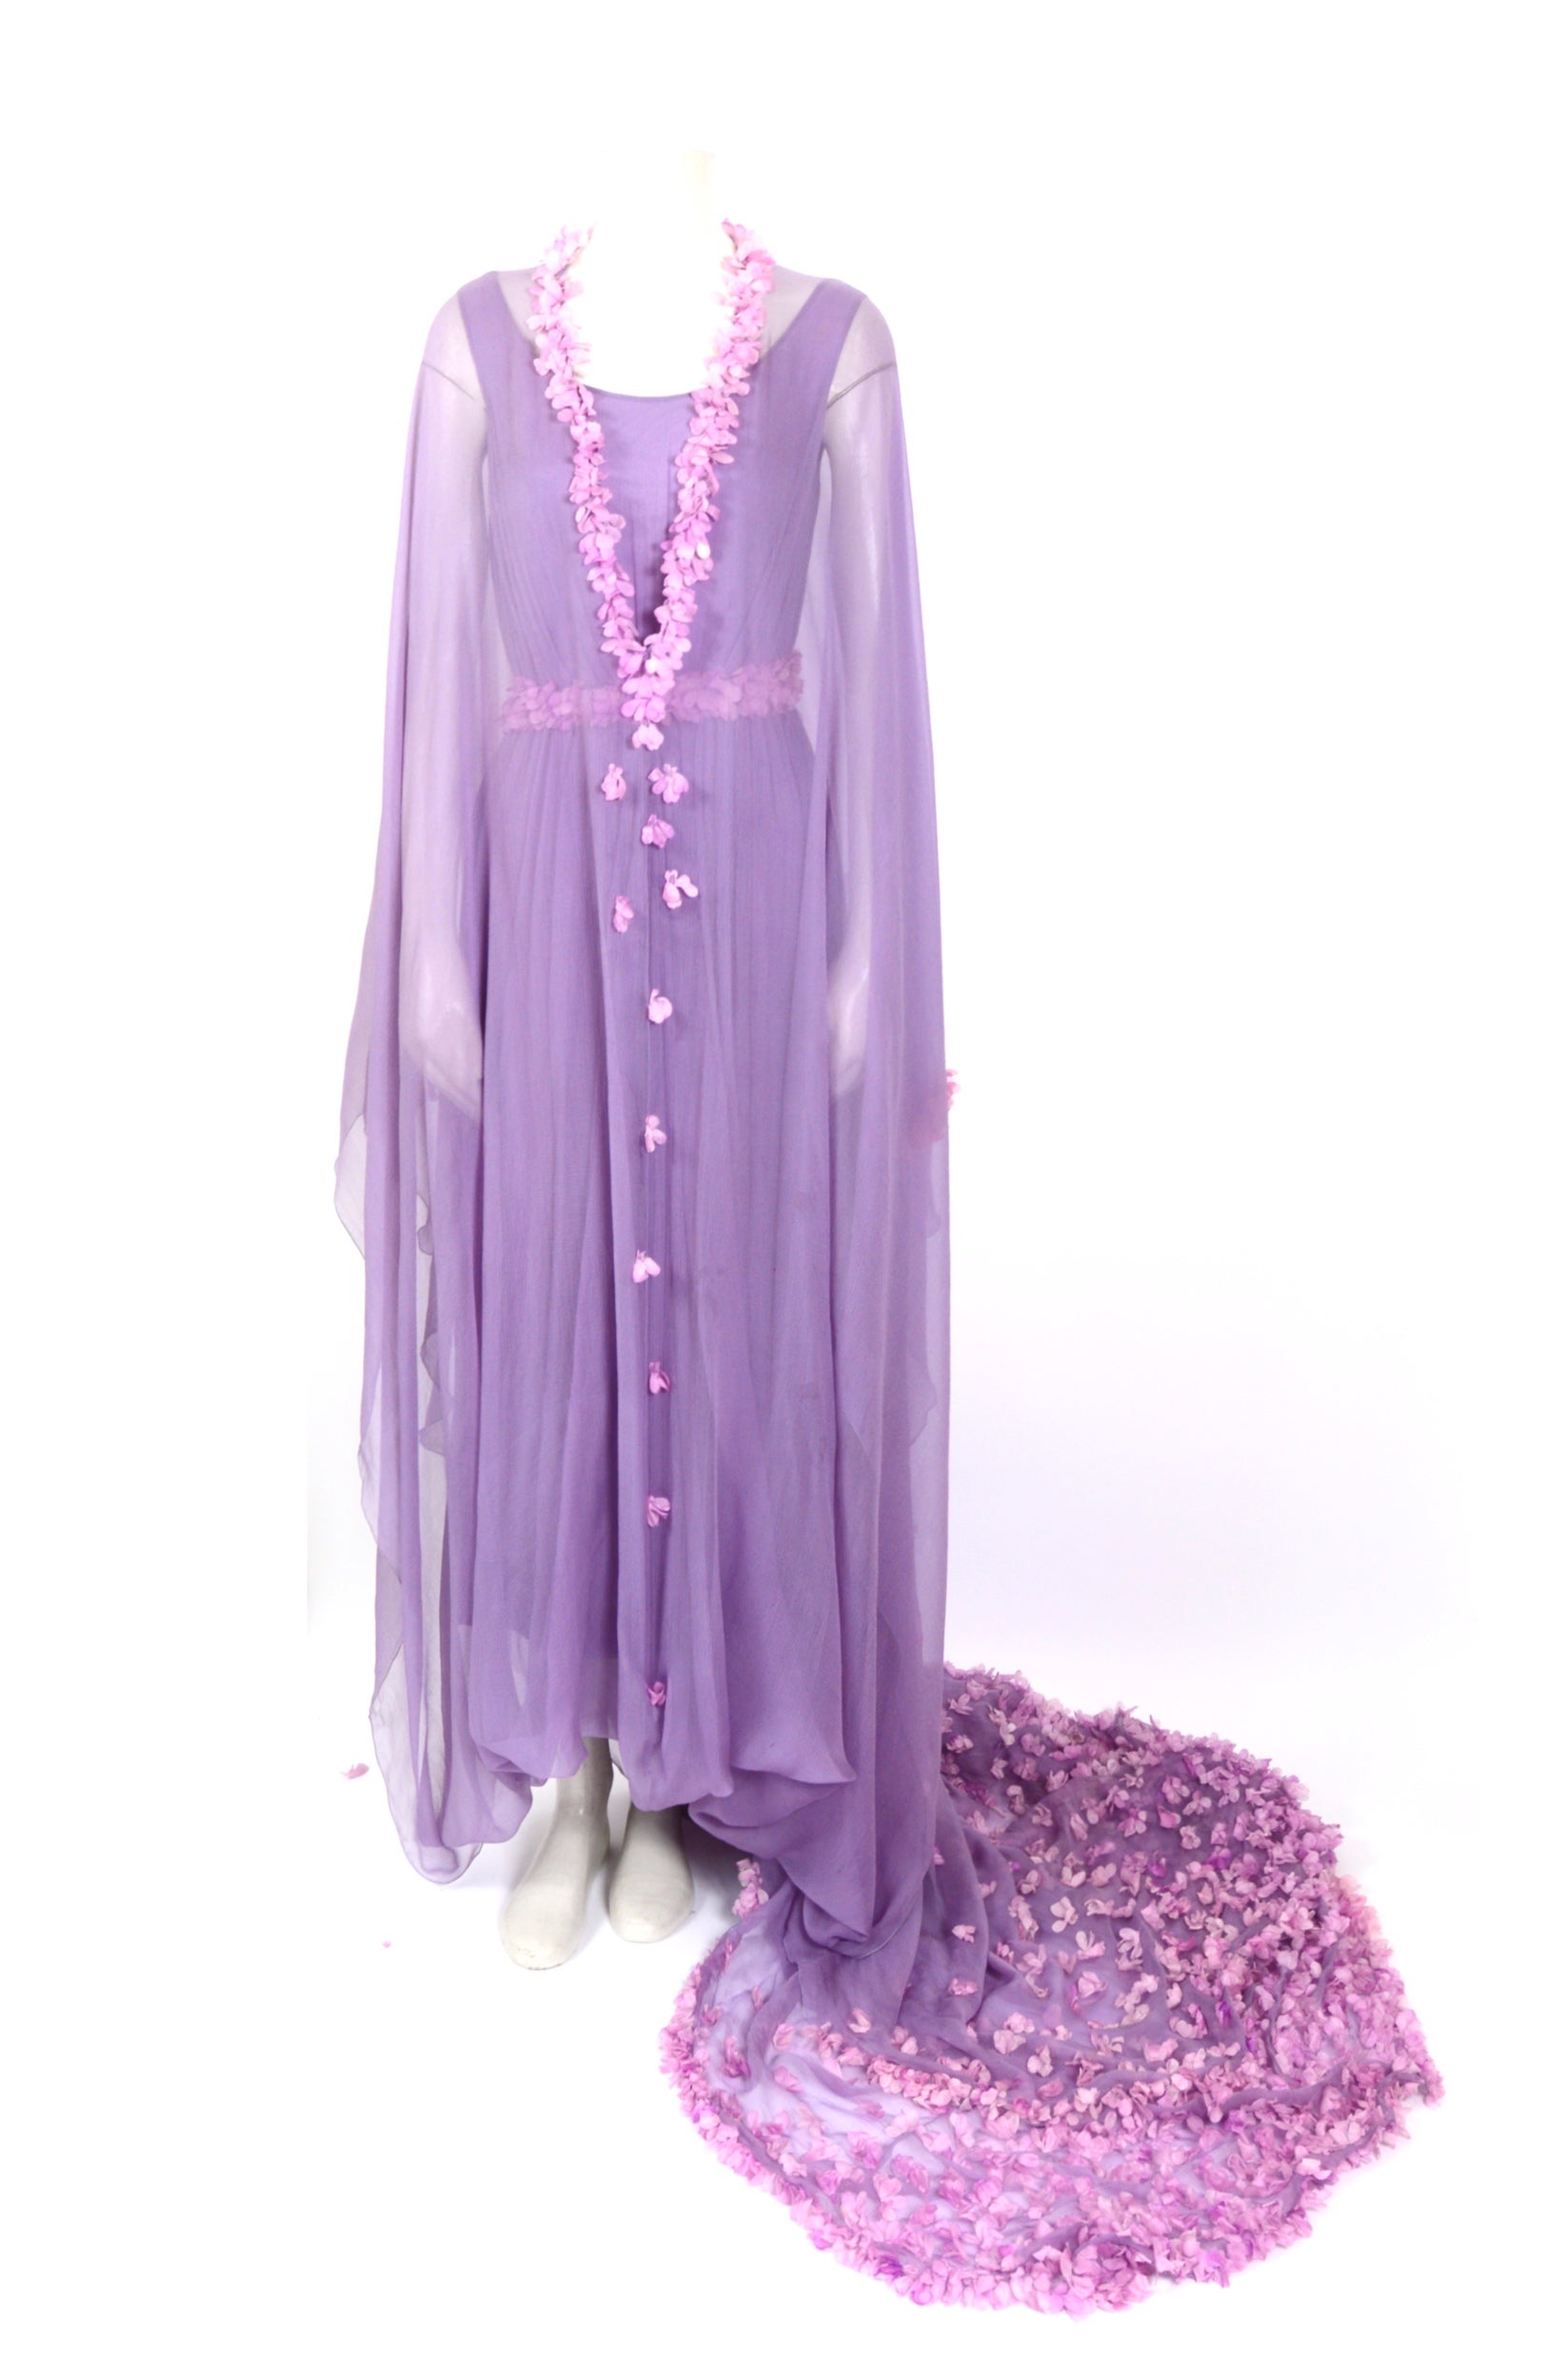 Valentino 1960s costume made silk lilac kaftan dress flower embellished train   In Excellent Condition For Sale In Antwerp, BE